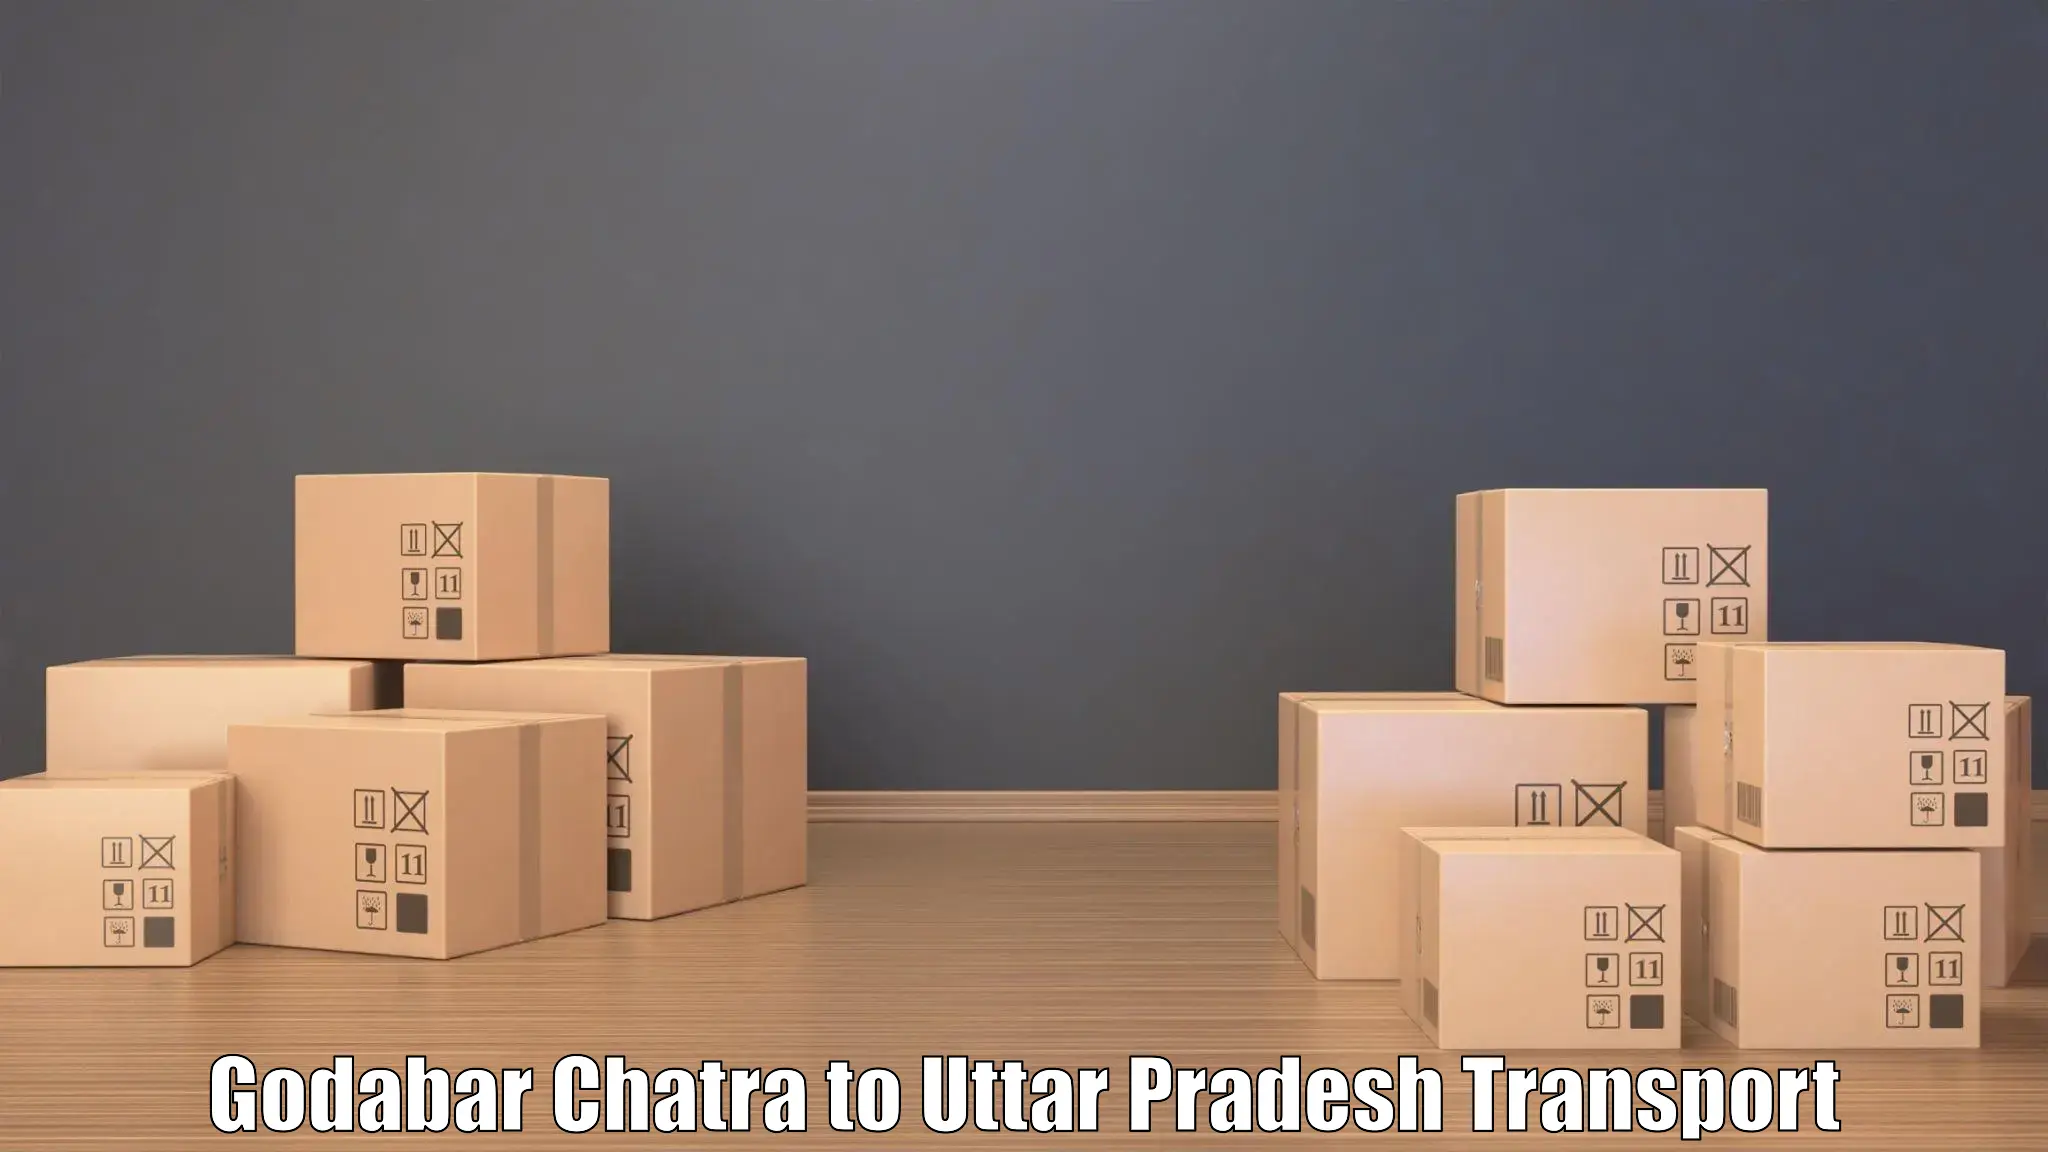 Air freight transport services Godabar Chatra to Khutar